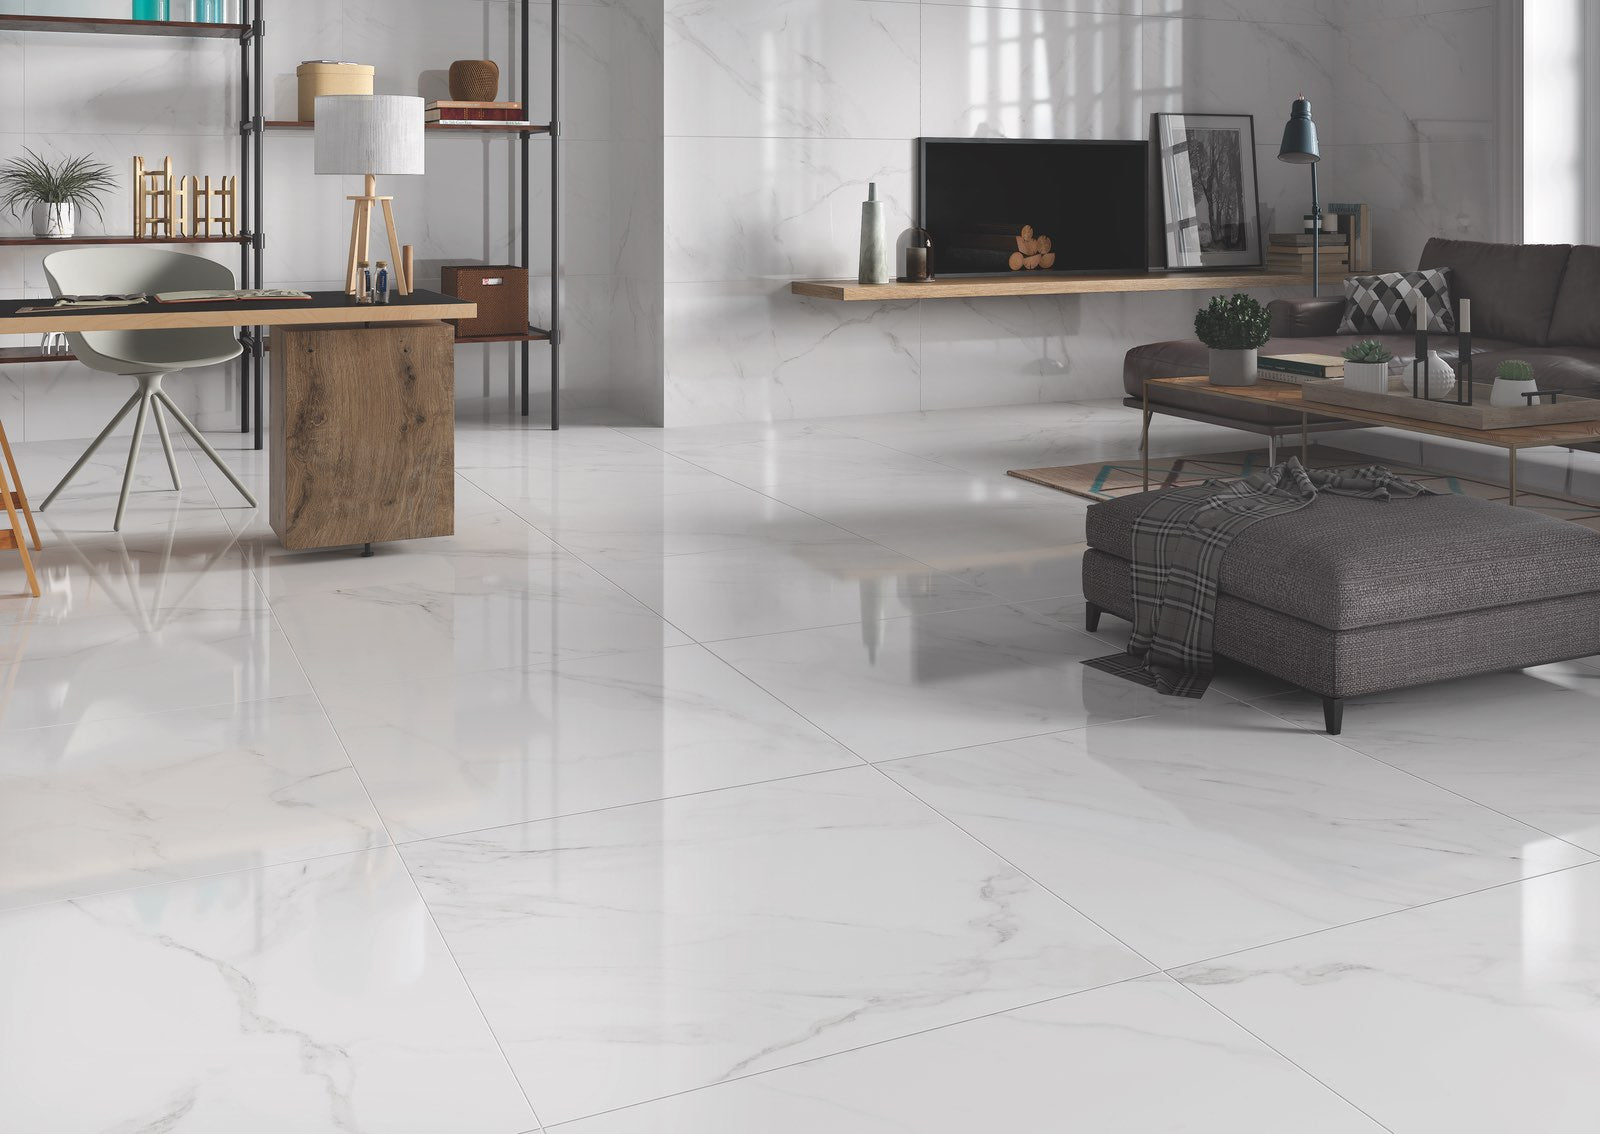 What Makes Porcelain Tile a Great Flooring Choice